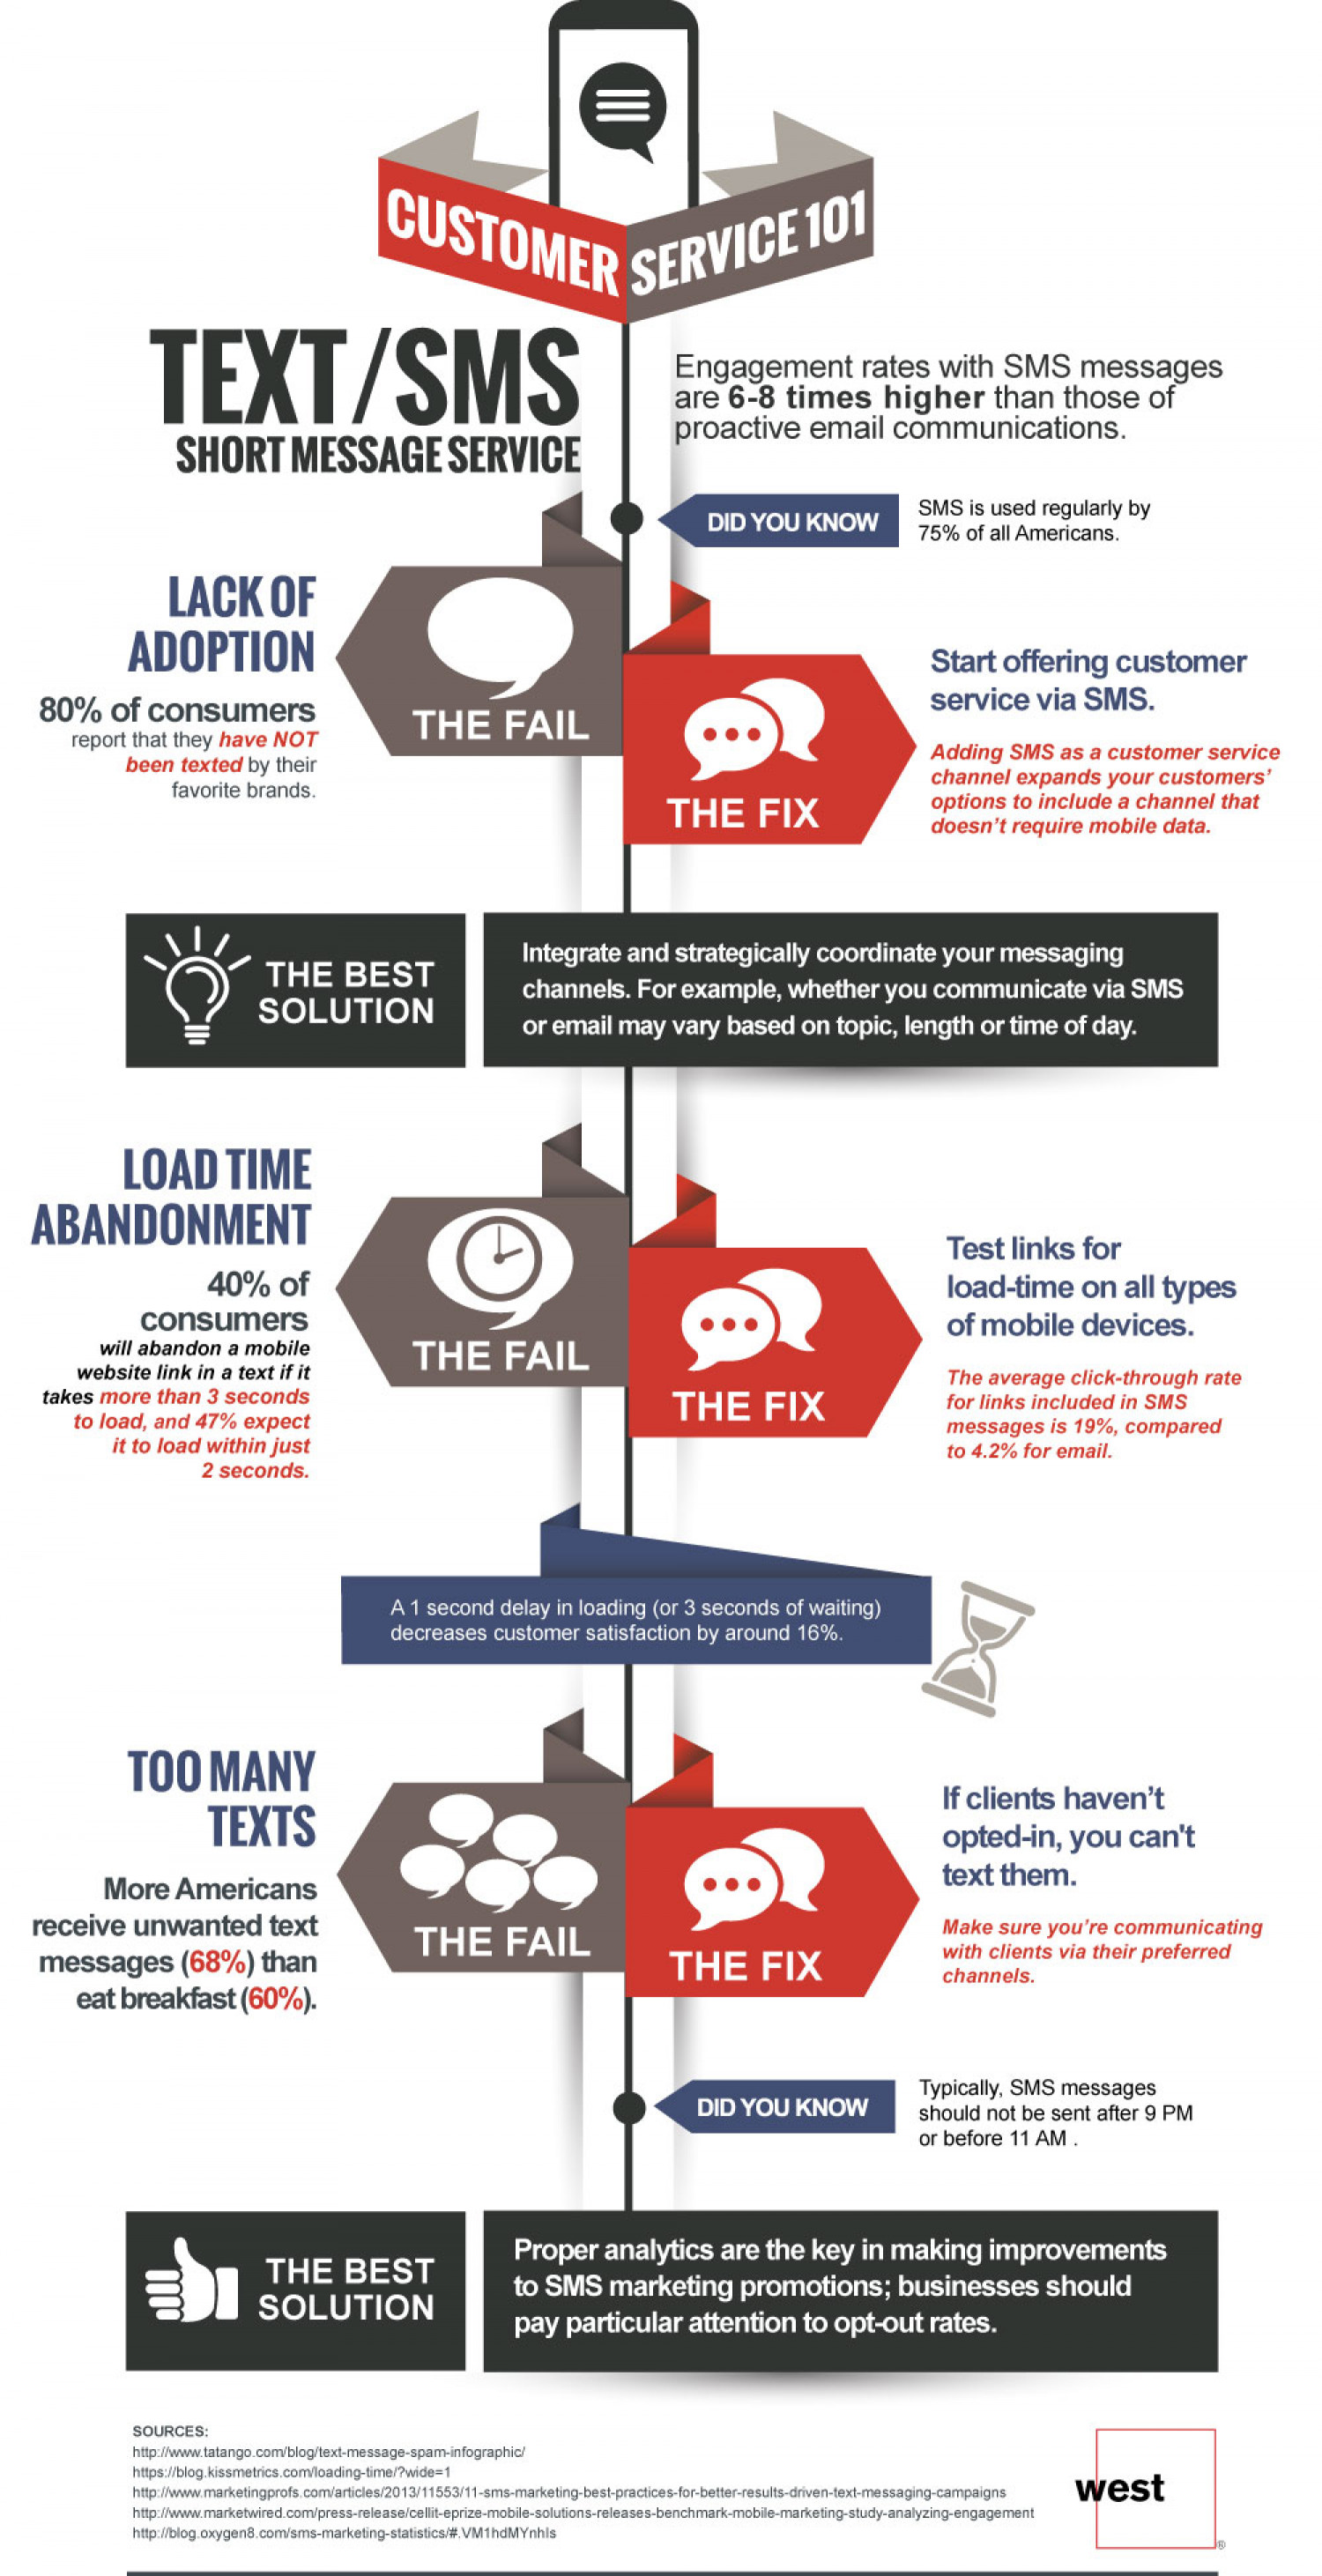 Improving the Customer Experience with SMS/Text Infographic